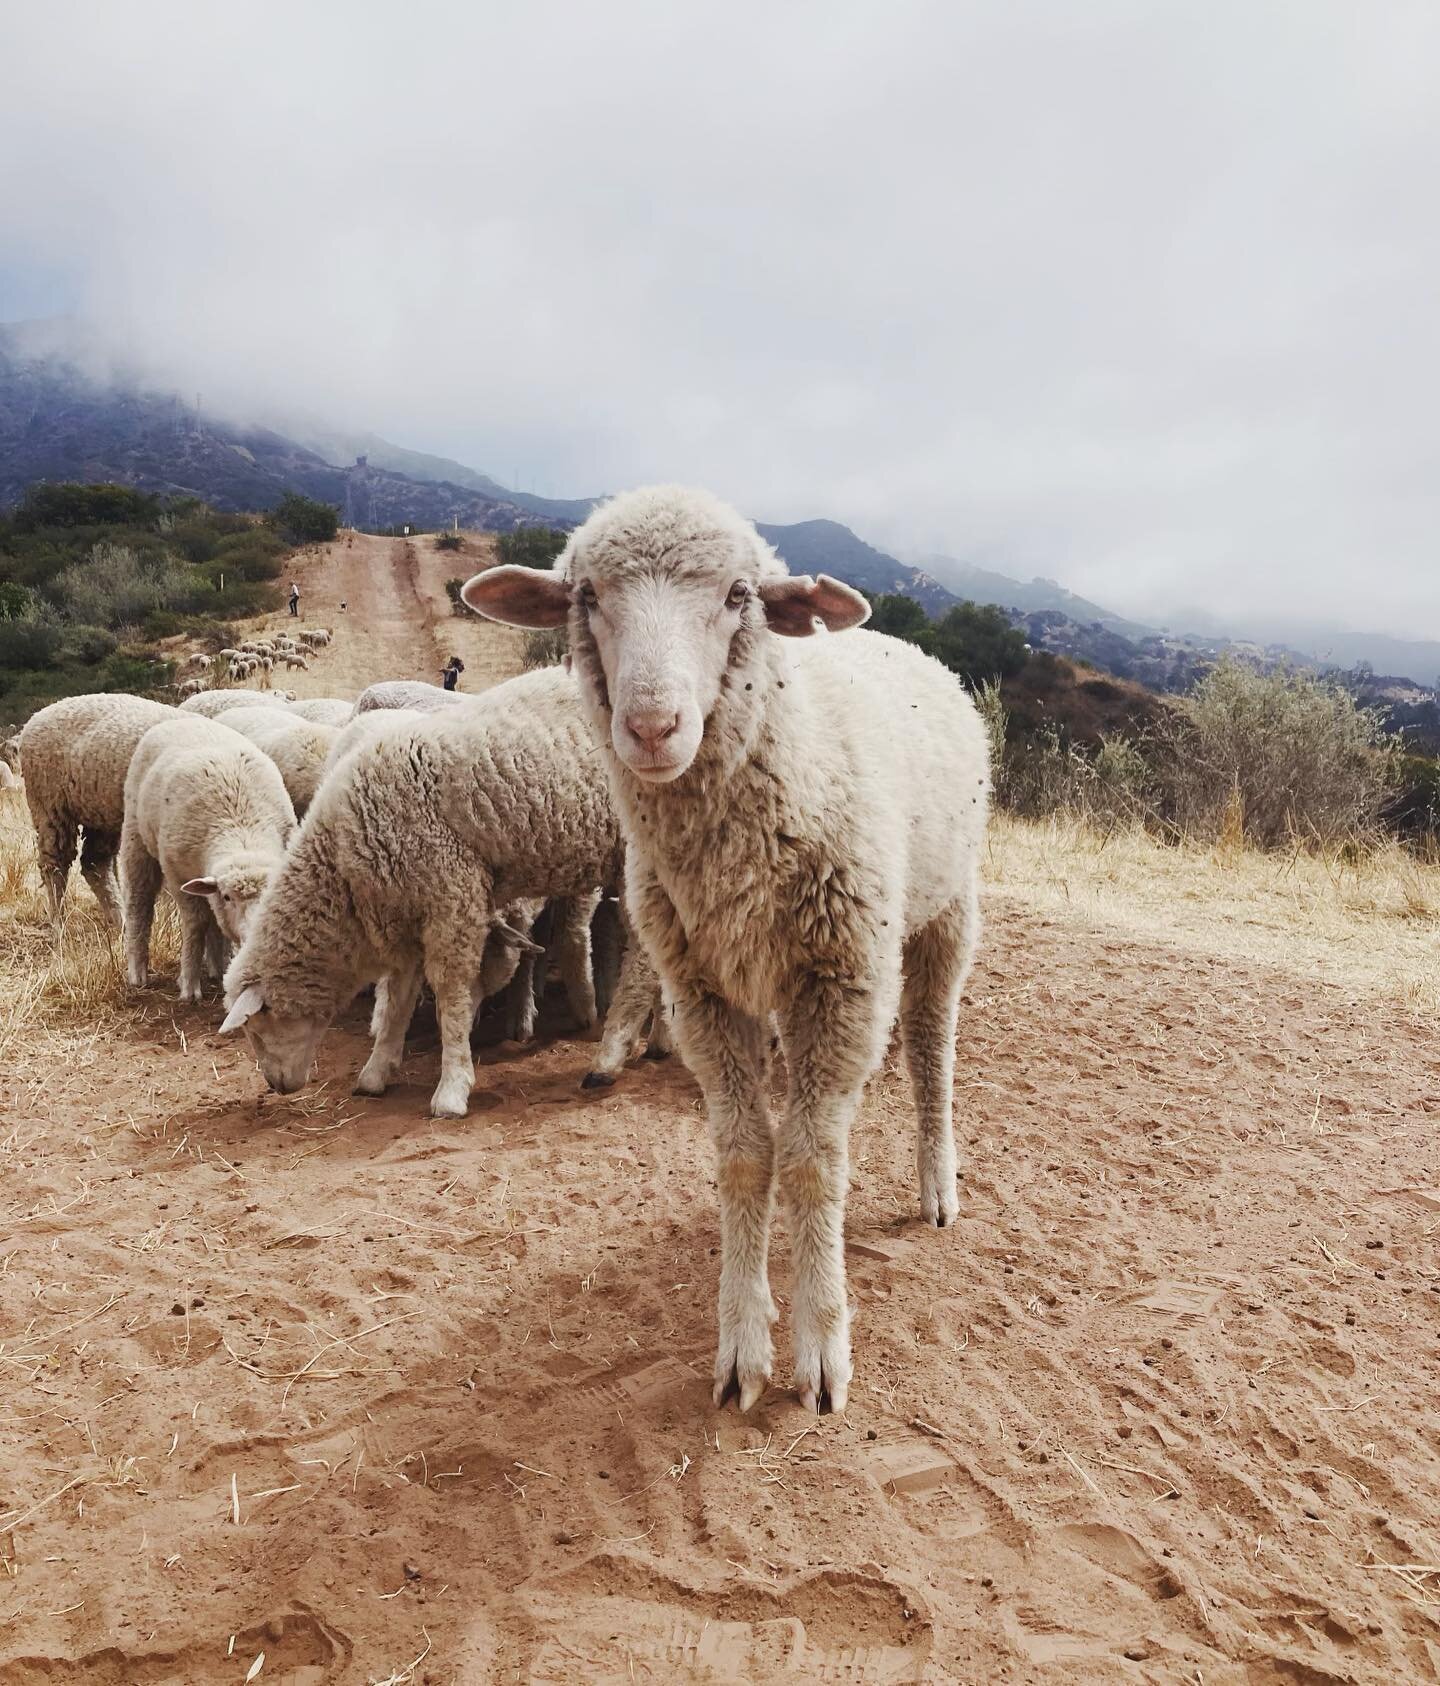 **Now open for pre-orders! Make a deposit and reserve your lamb today on our website (link in bio). When I watch our sheep eat the diverse and wild vegetation throughout our county, I think about how nutritionally dense the meat that comes from them 